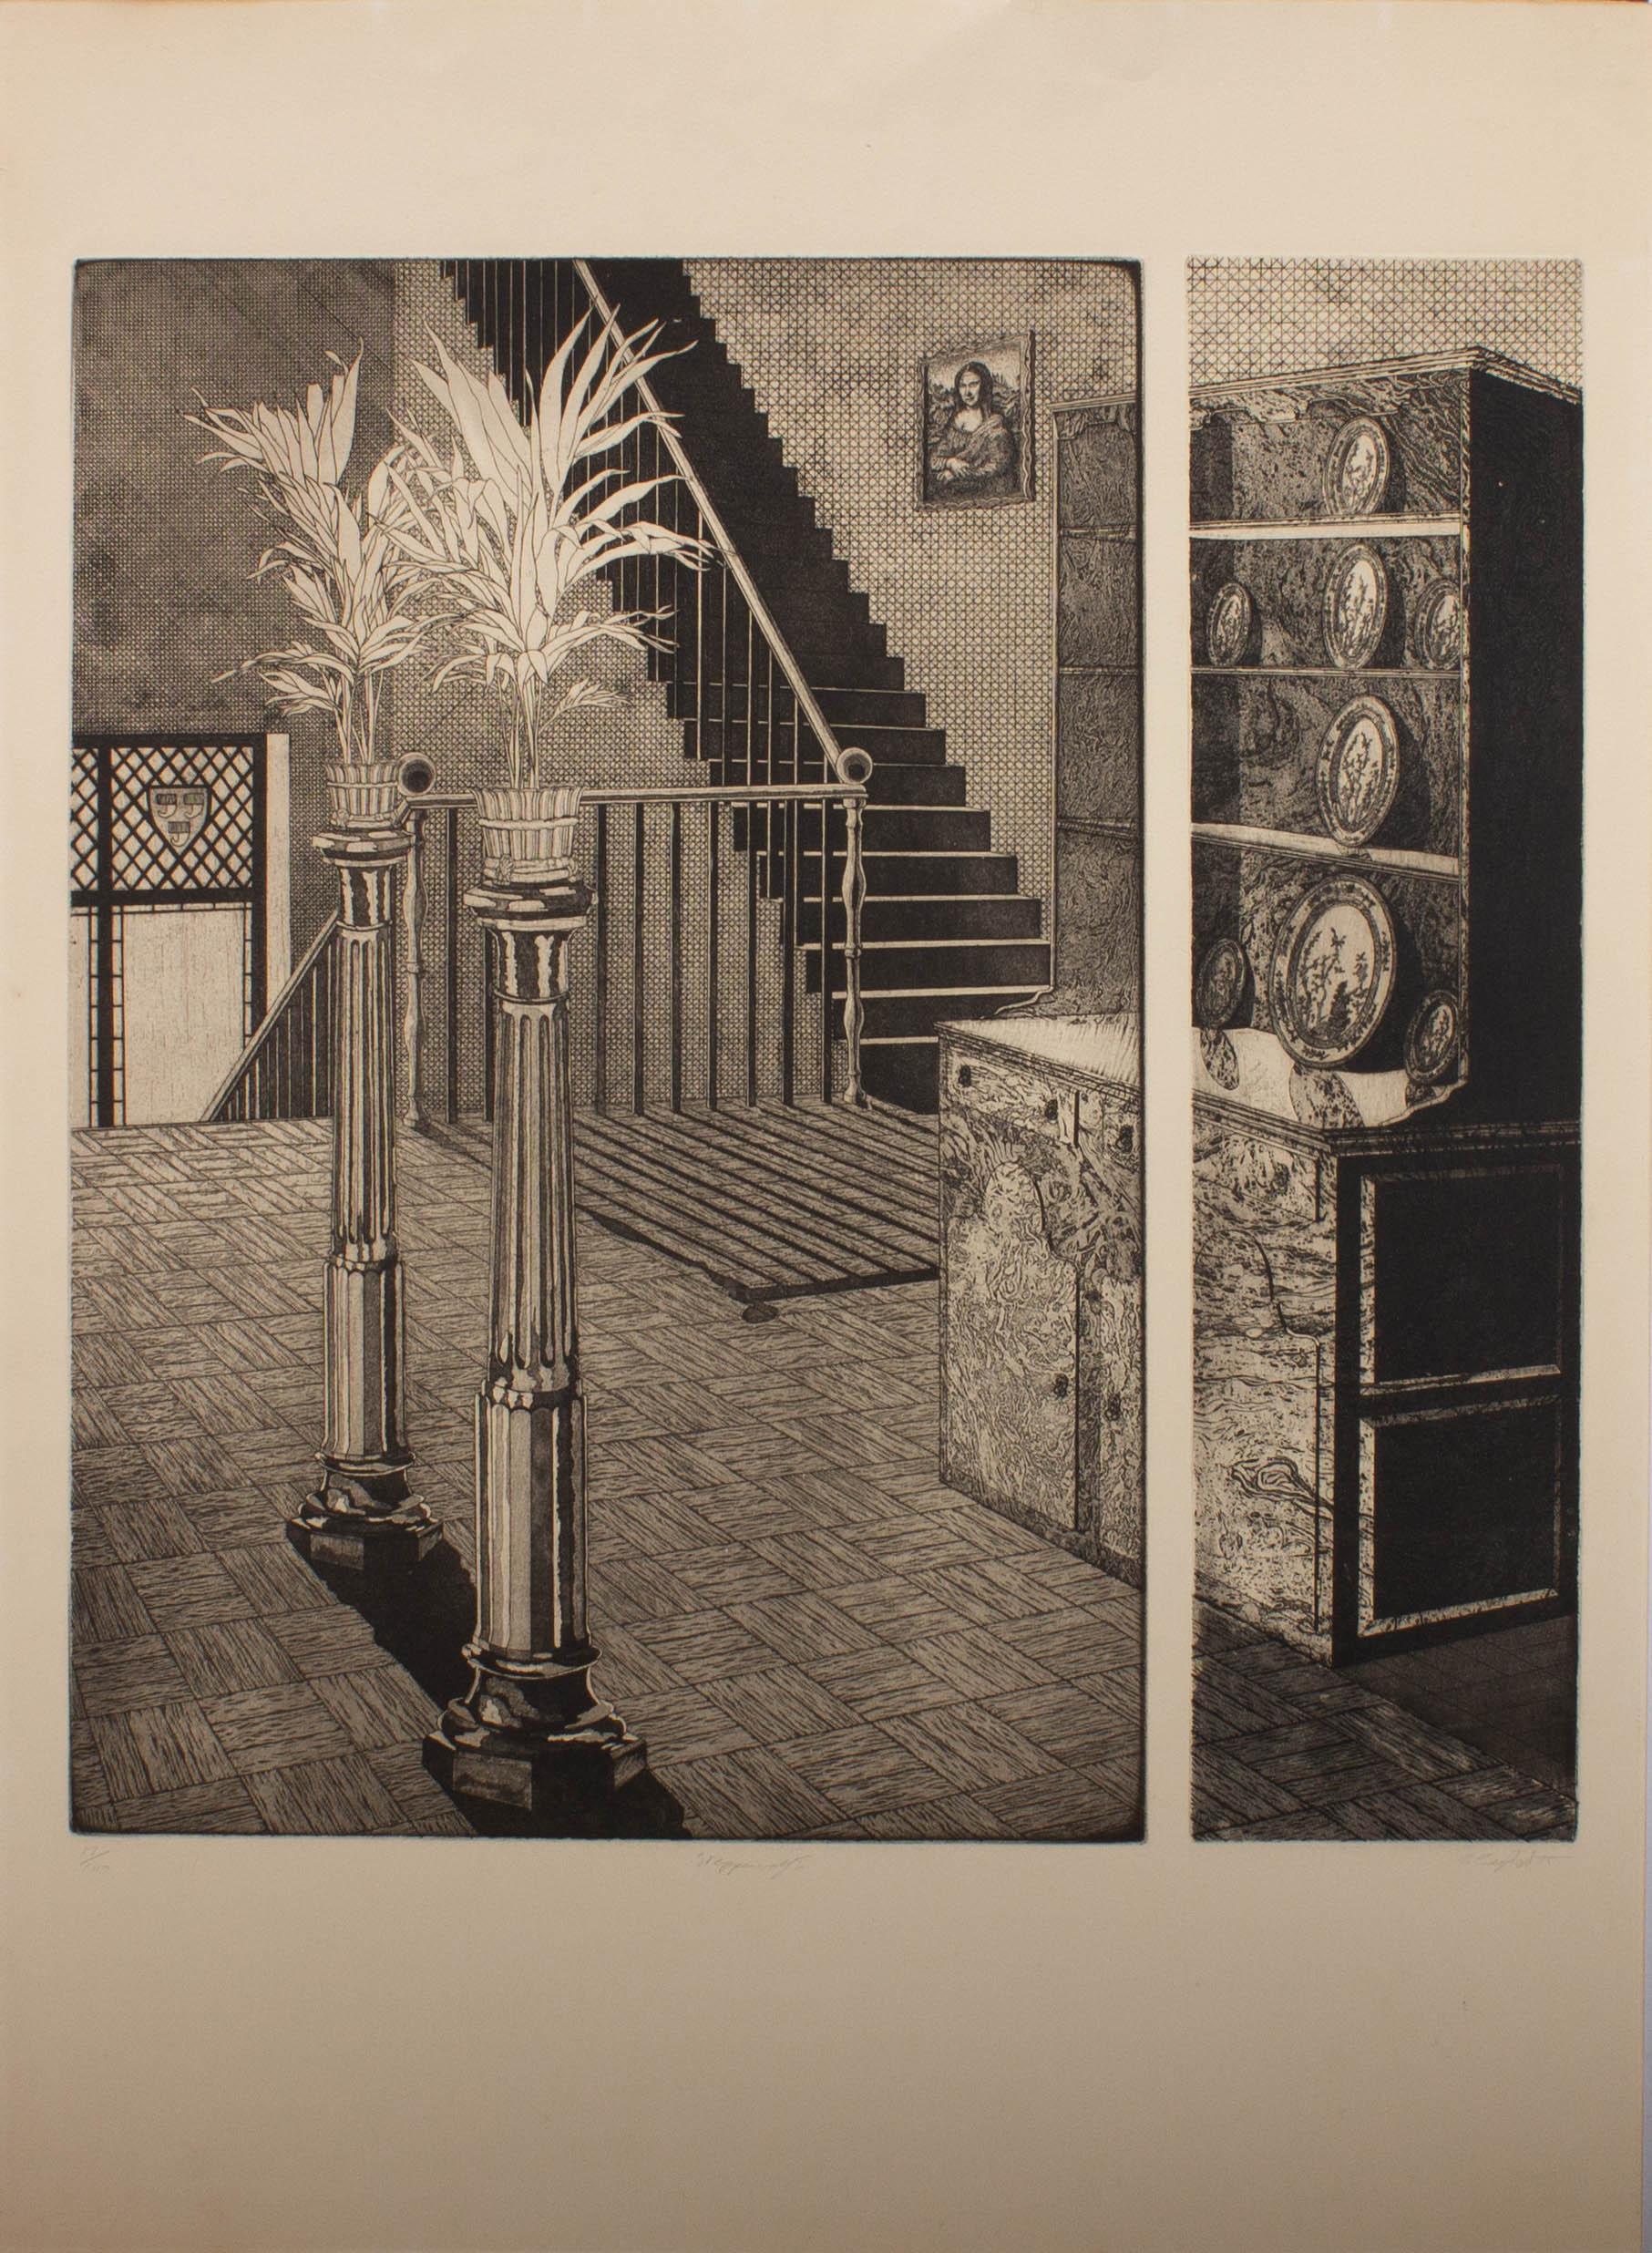 A truly striking acid bath etching showing an interior inspired by the house inhabited by the protagonist of Herman Hesse's novel, Steppenwolf. The interior has a foreboding surrealism in its stretched proportions and unnerving textures. This